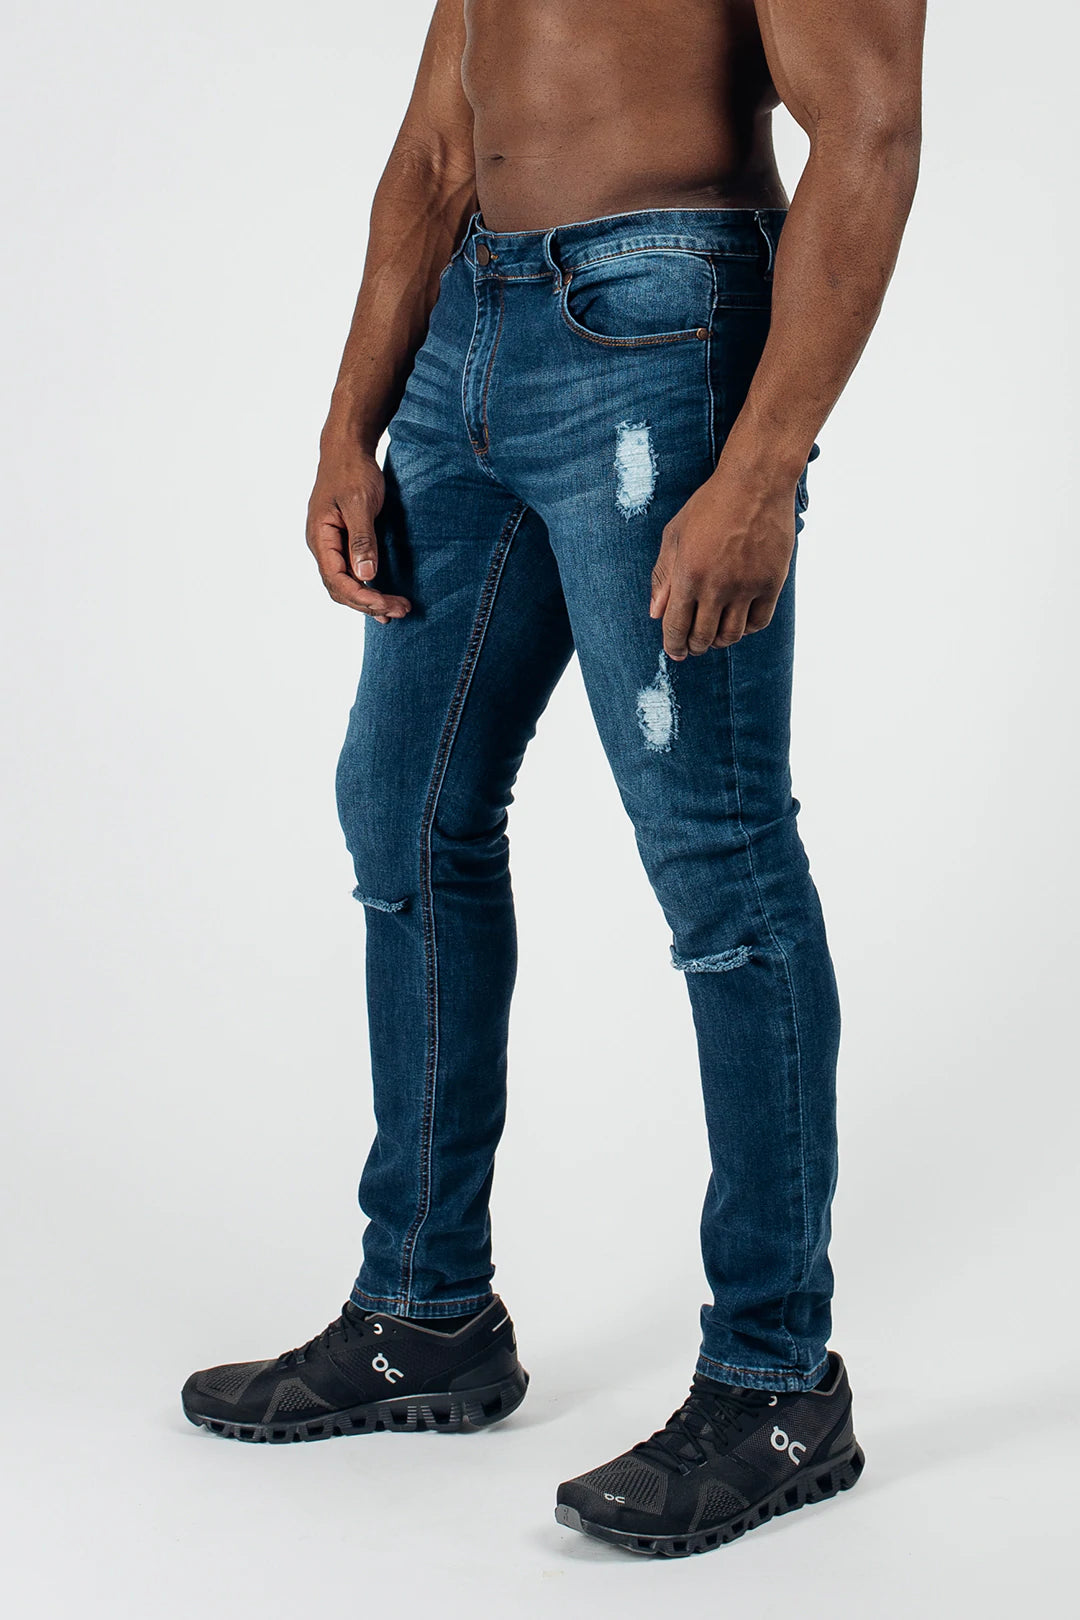 Slim Athletic Fit Destroyed Jeans - Medium Distressed - photo from front in focus #color_medium-distressed